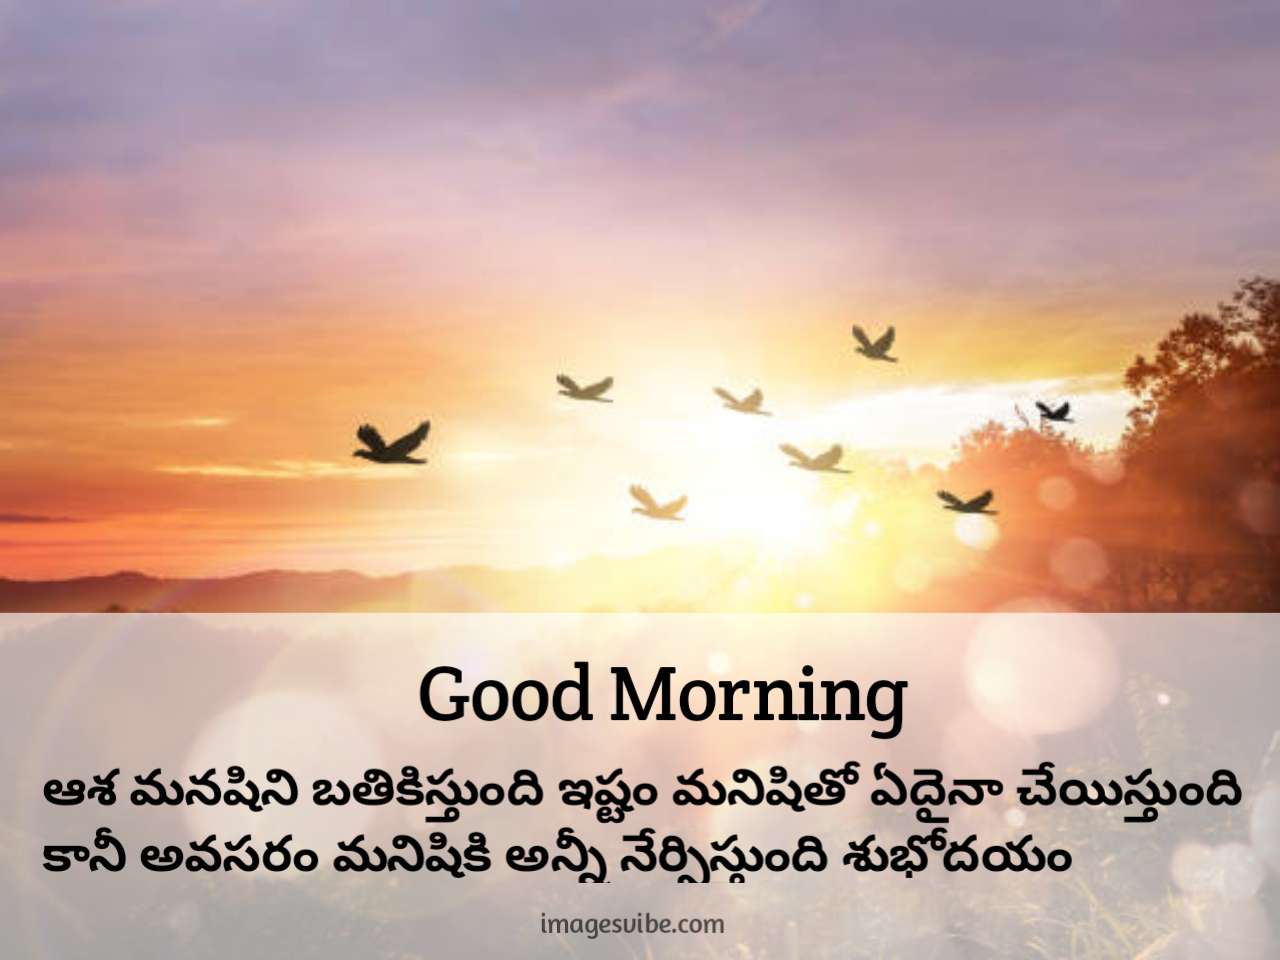 Collection of over 999+ beautiful Telugu good morning images – Full 4K stunning good morning images in Telugu